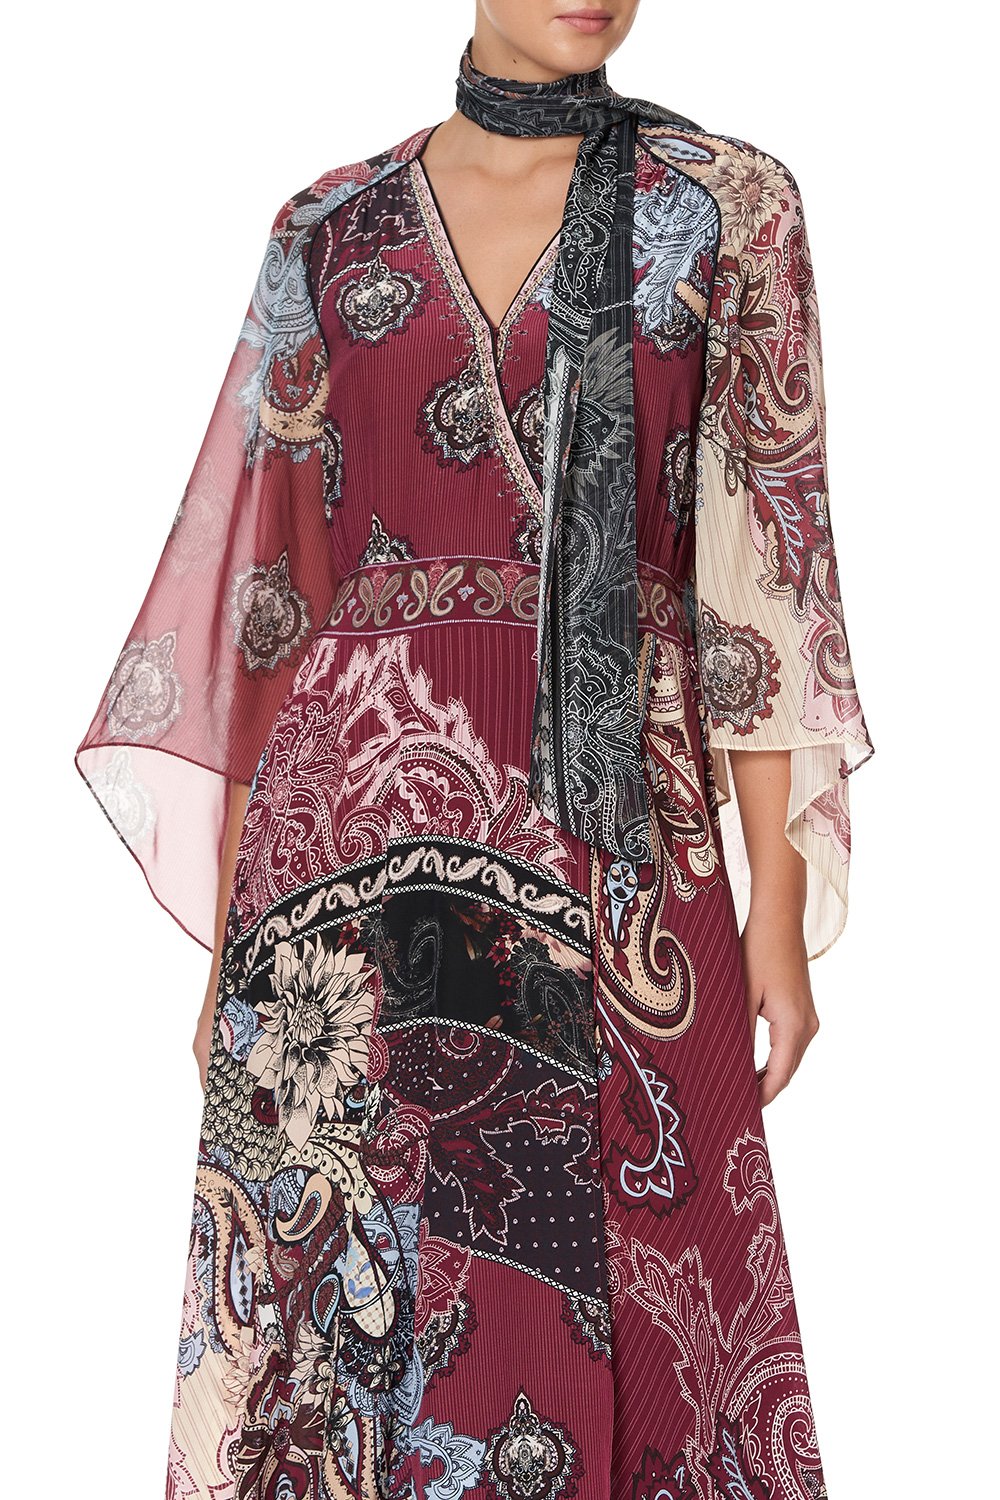 WRAP DRESS WITH NECK TIE TALE OF THE FIRE BIRD